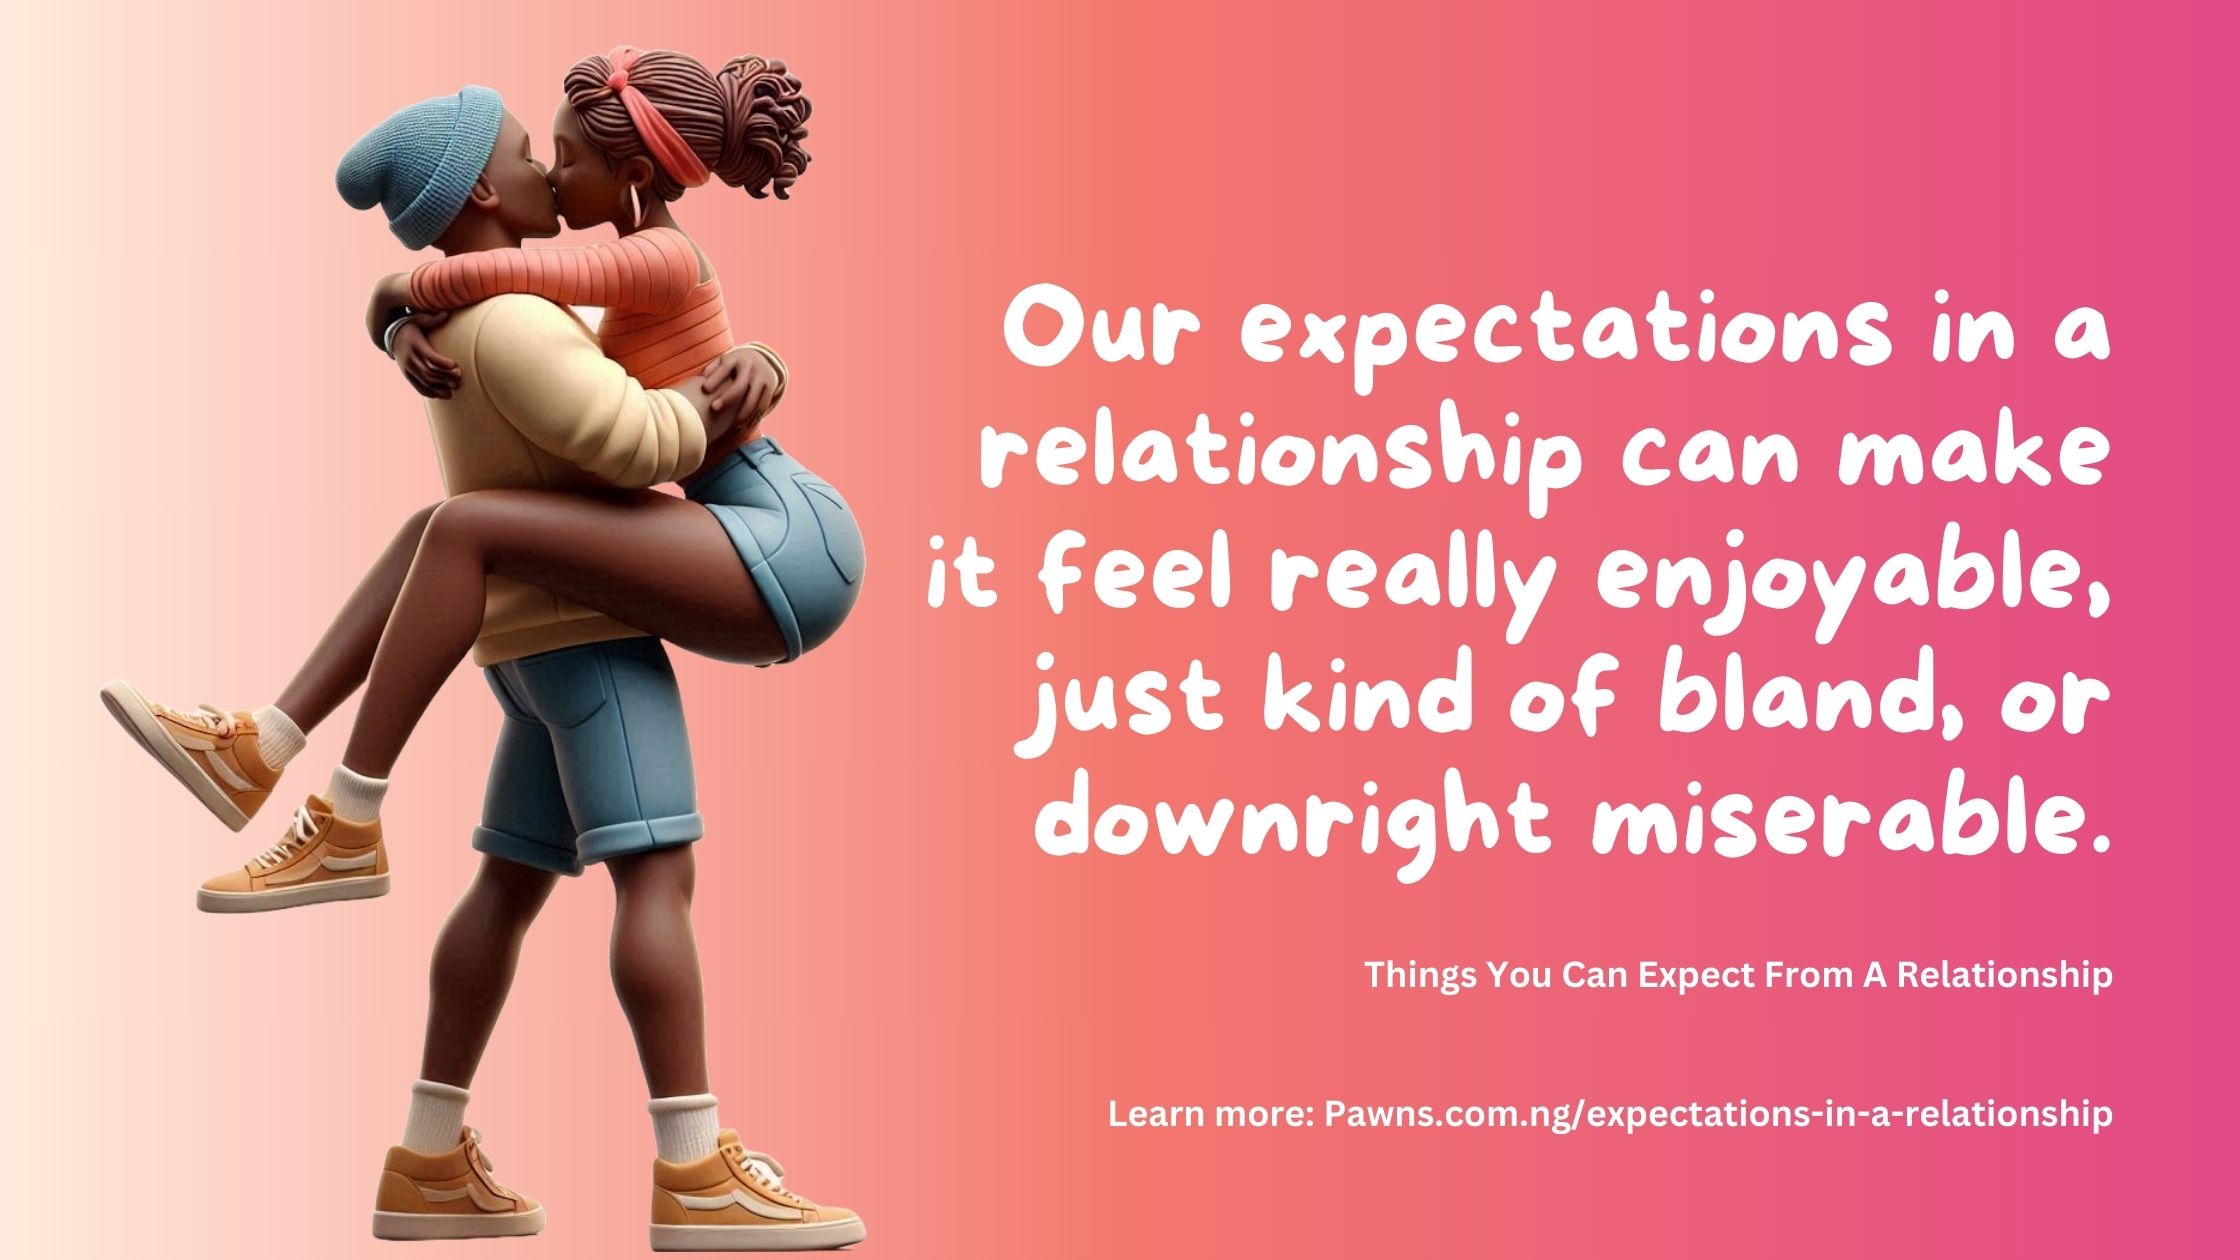 Our expectations in a relationship can make it feel really enjoyable, just kind of bland, or downright miserable. Things You Can Expect From A Relationship